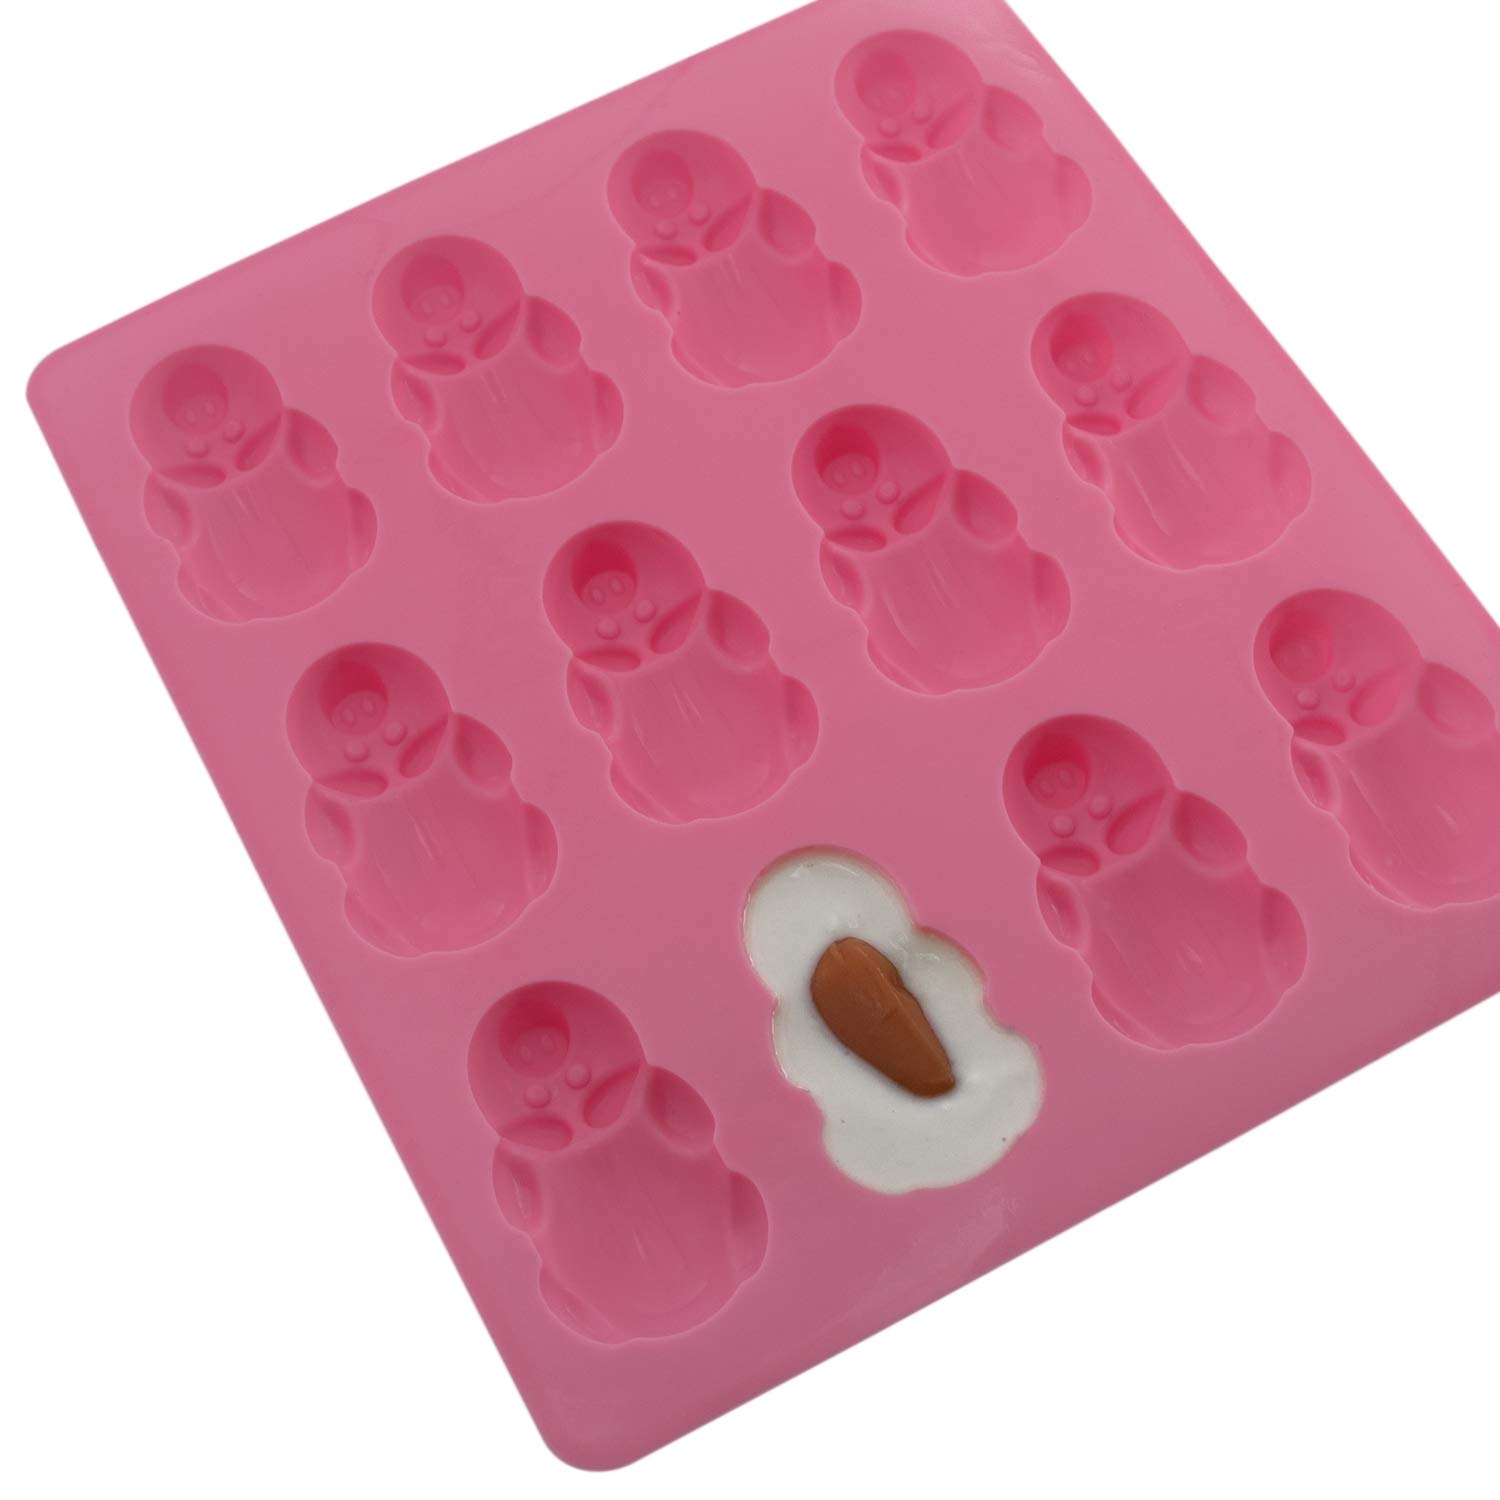 24 Little Pigs in 2 Blanket Silicone Baking Molds, Non-Stick Cute Piggy Mould Baking Pan for DIY Chocolate Candy Cake Fondant Jello Pops Ice Cube Tray